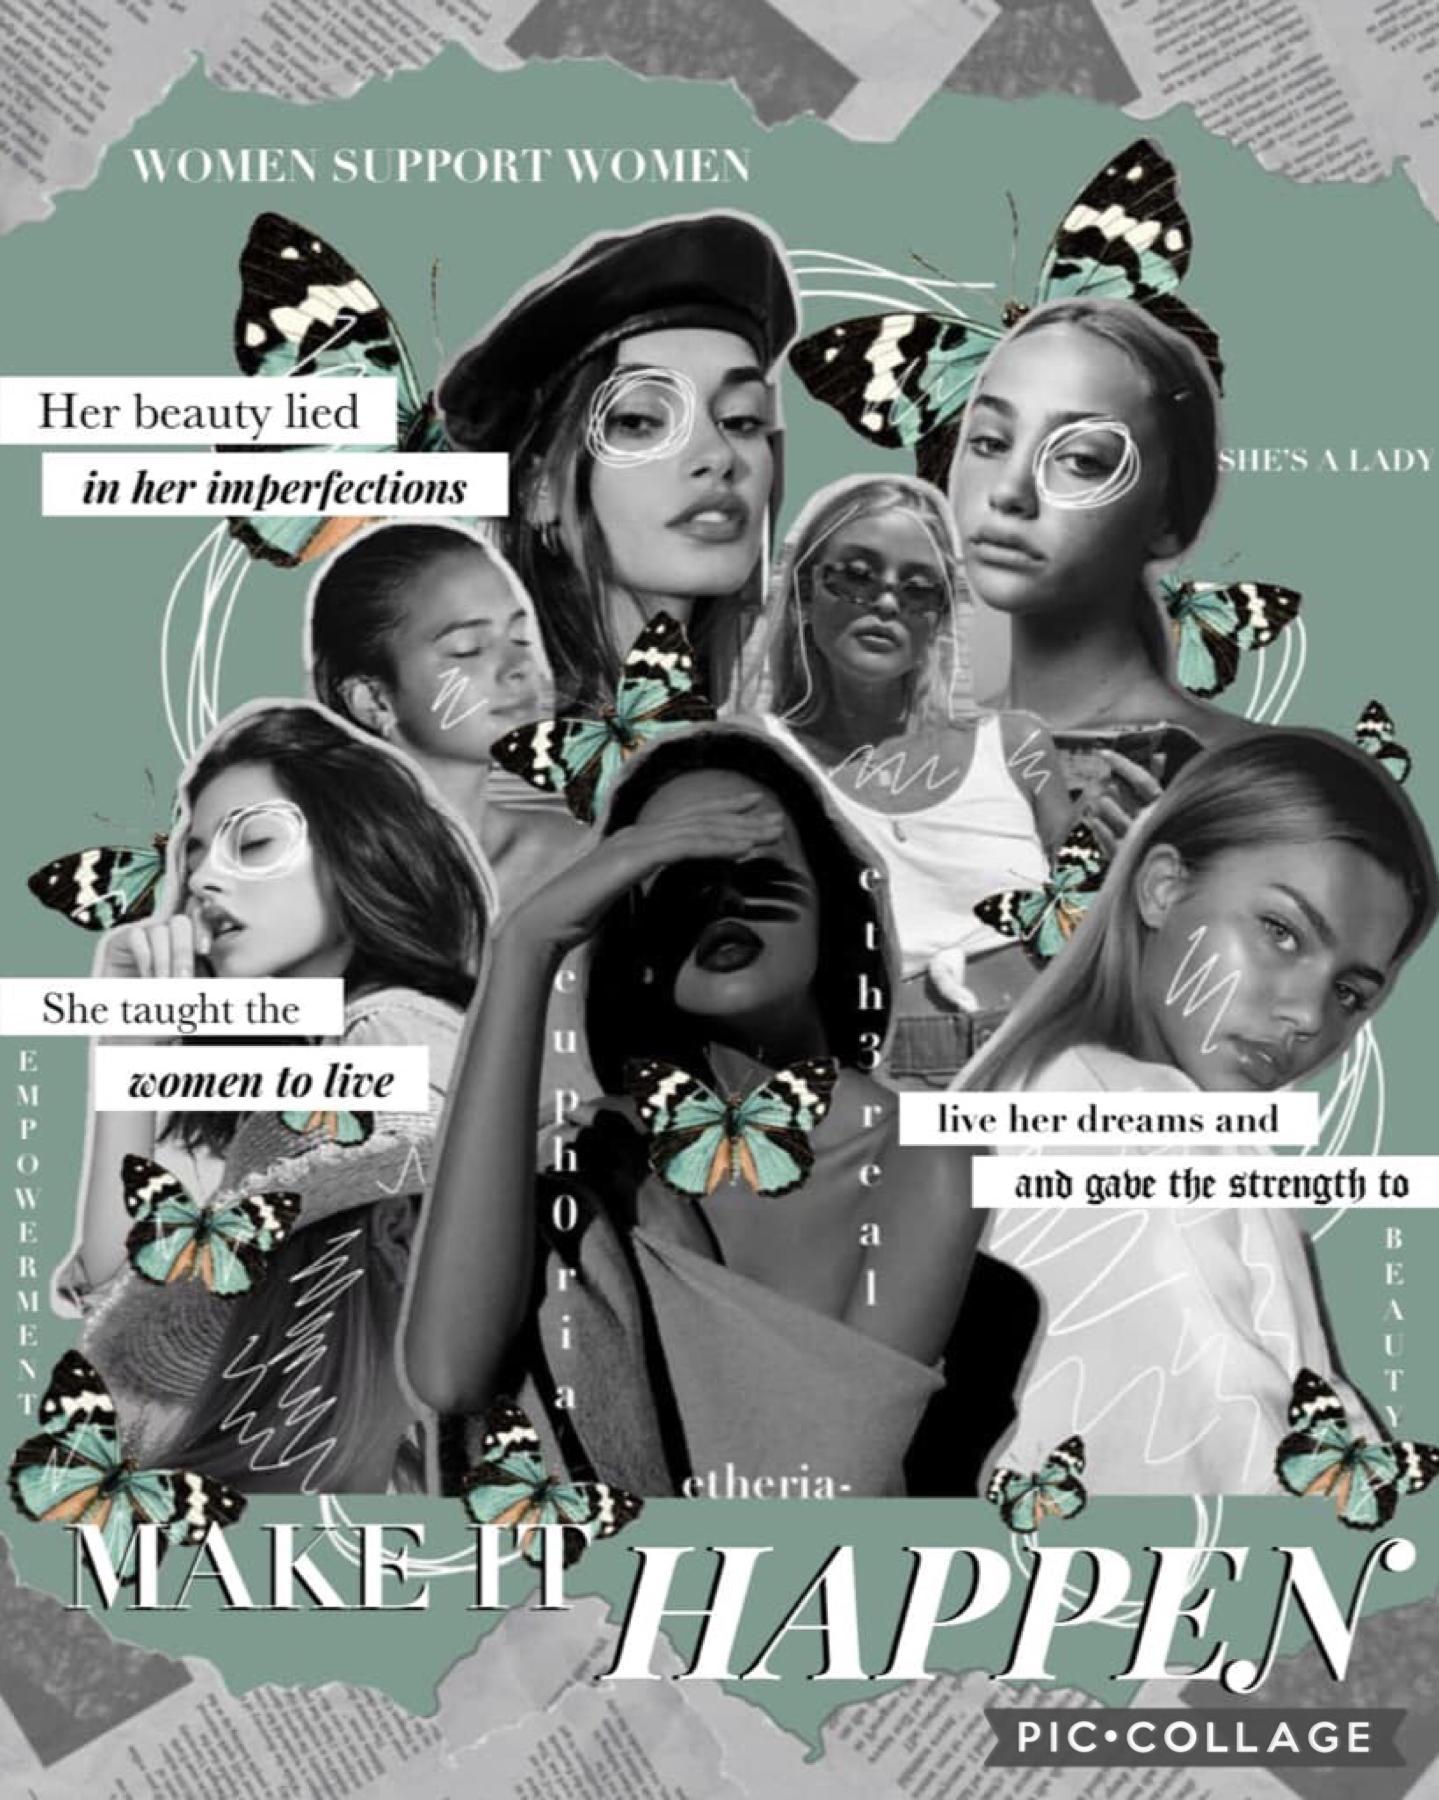 tap 👗
second collage for our collab series! the theme is women’s history month! women have their rights too! stay tuned for the rest of the collages :]